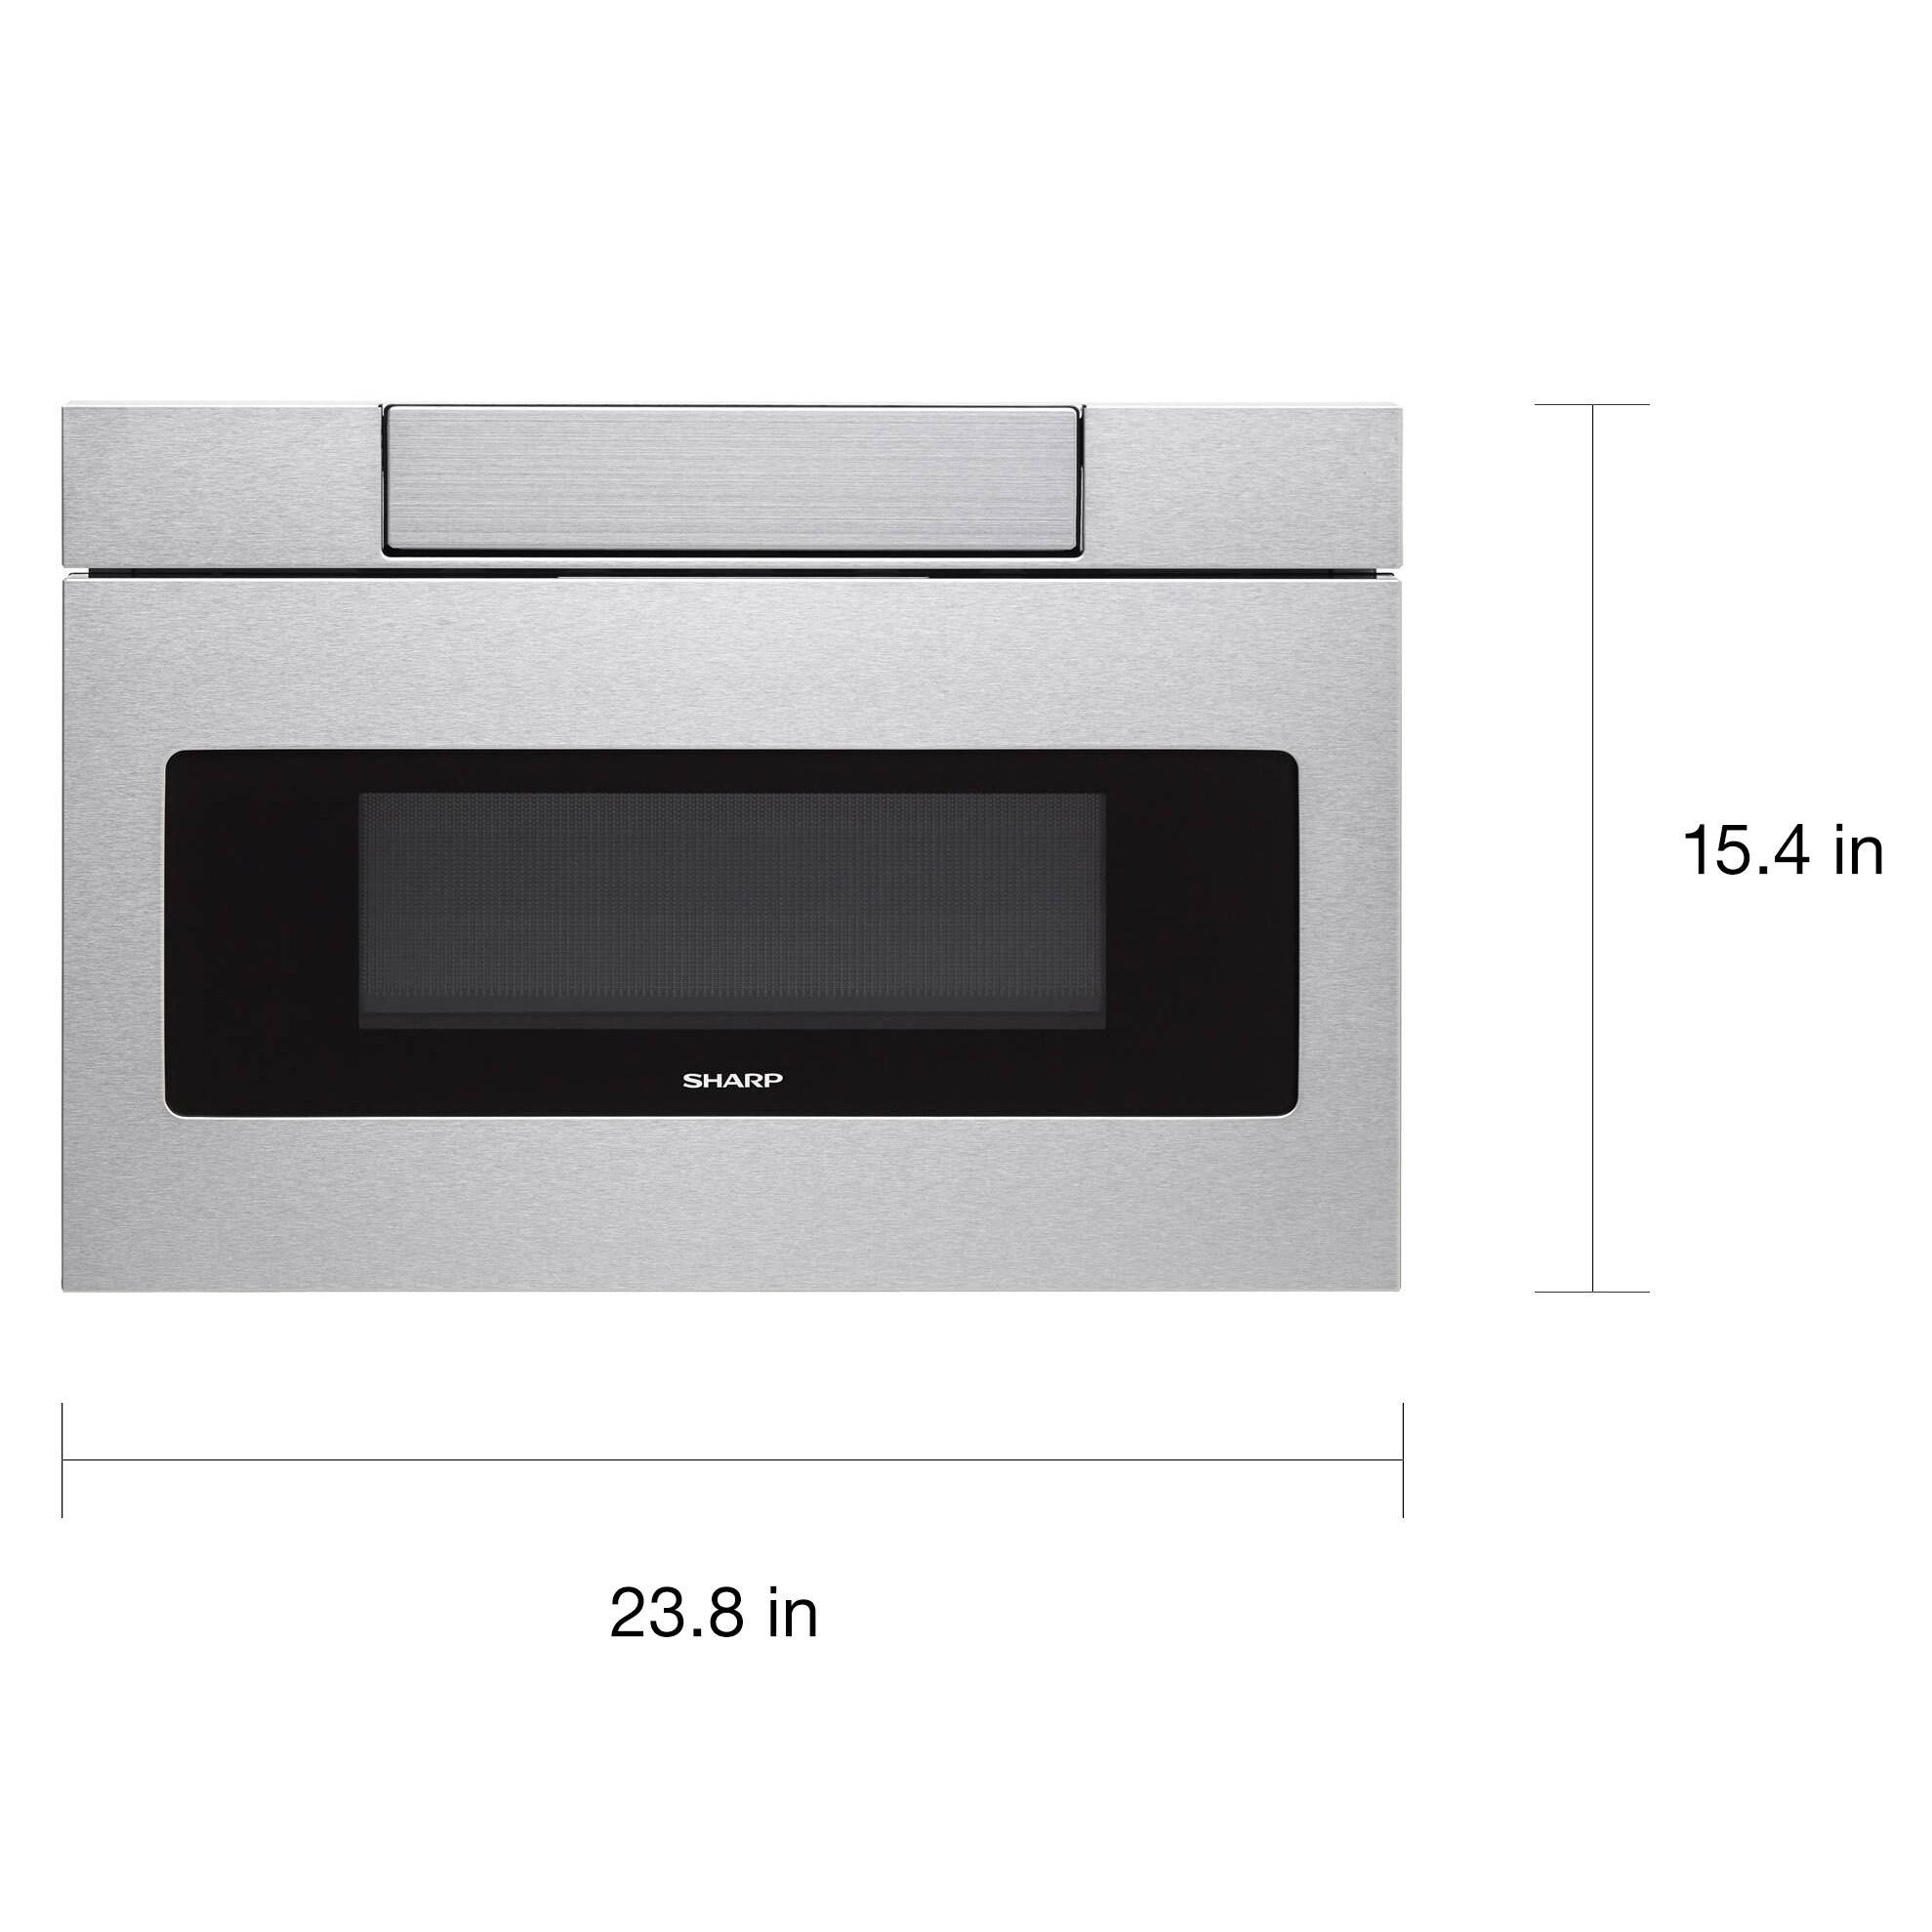 Sharp 24-inch Stainless Steel Microwave Drawer, Model SMD2470AS - Silver | Bed Bath & Beyond